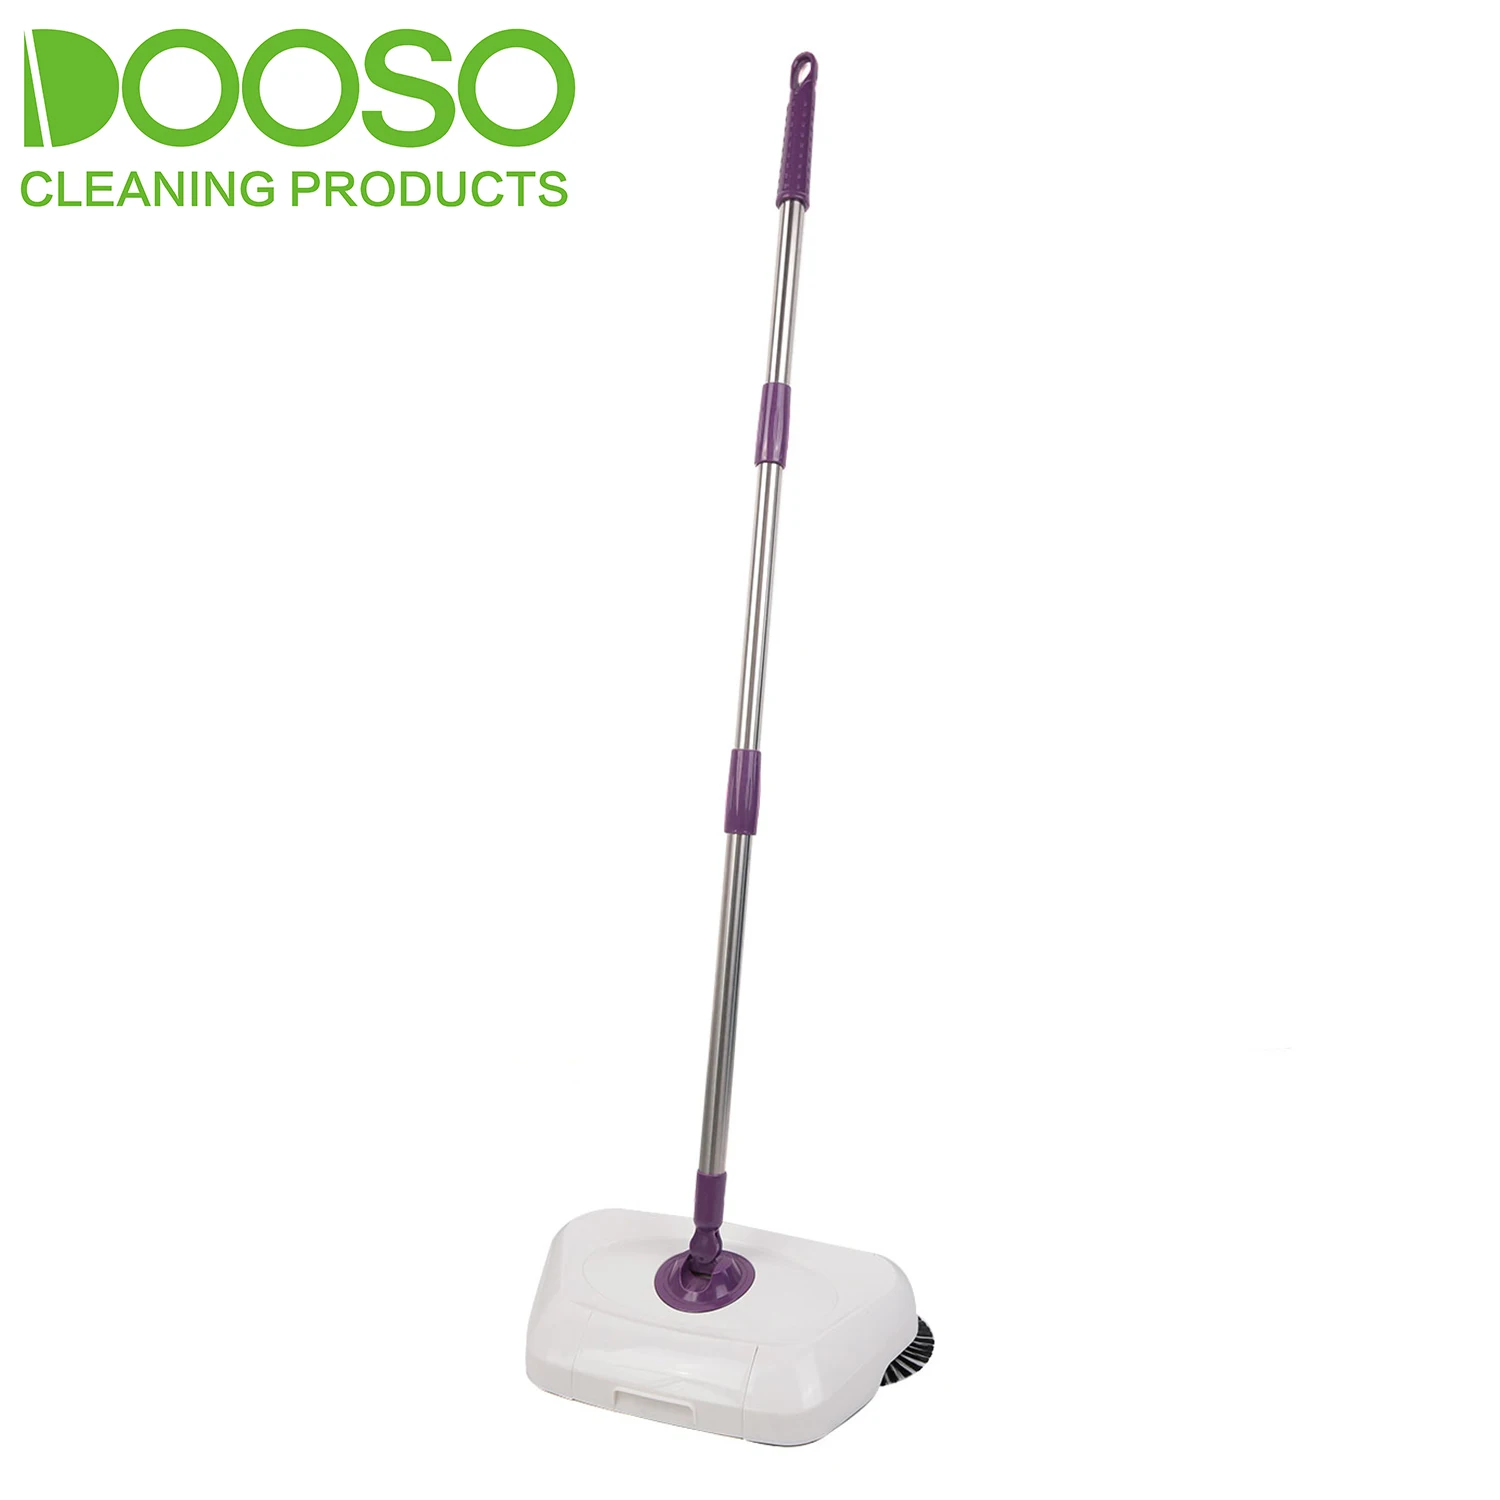 

360 Degree Easy Cleaning Sweeping Machine Magic Spin Broom, Red